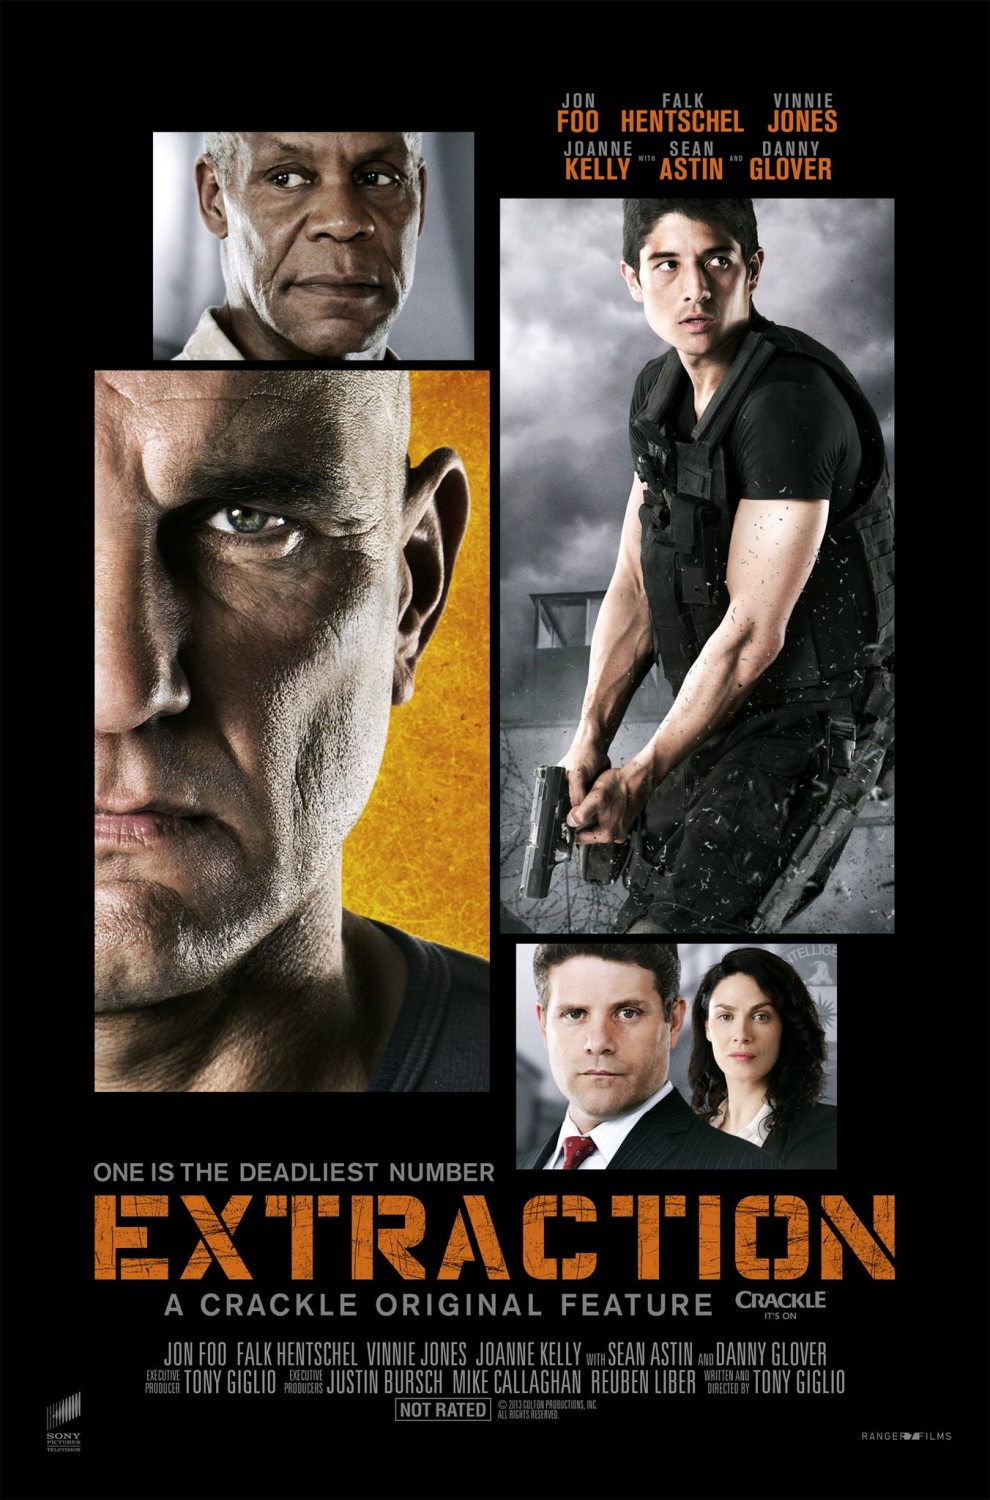 Extra Large TV Poster Image for Extraction 